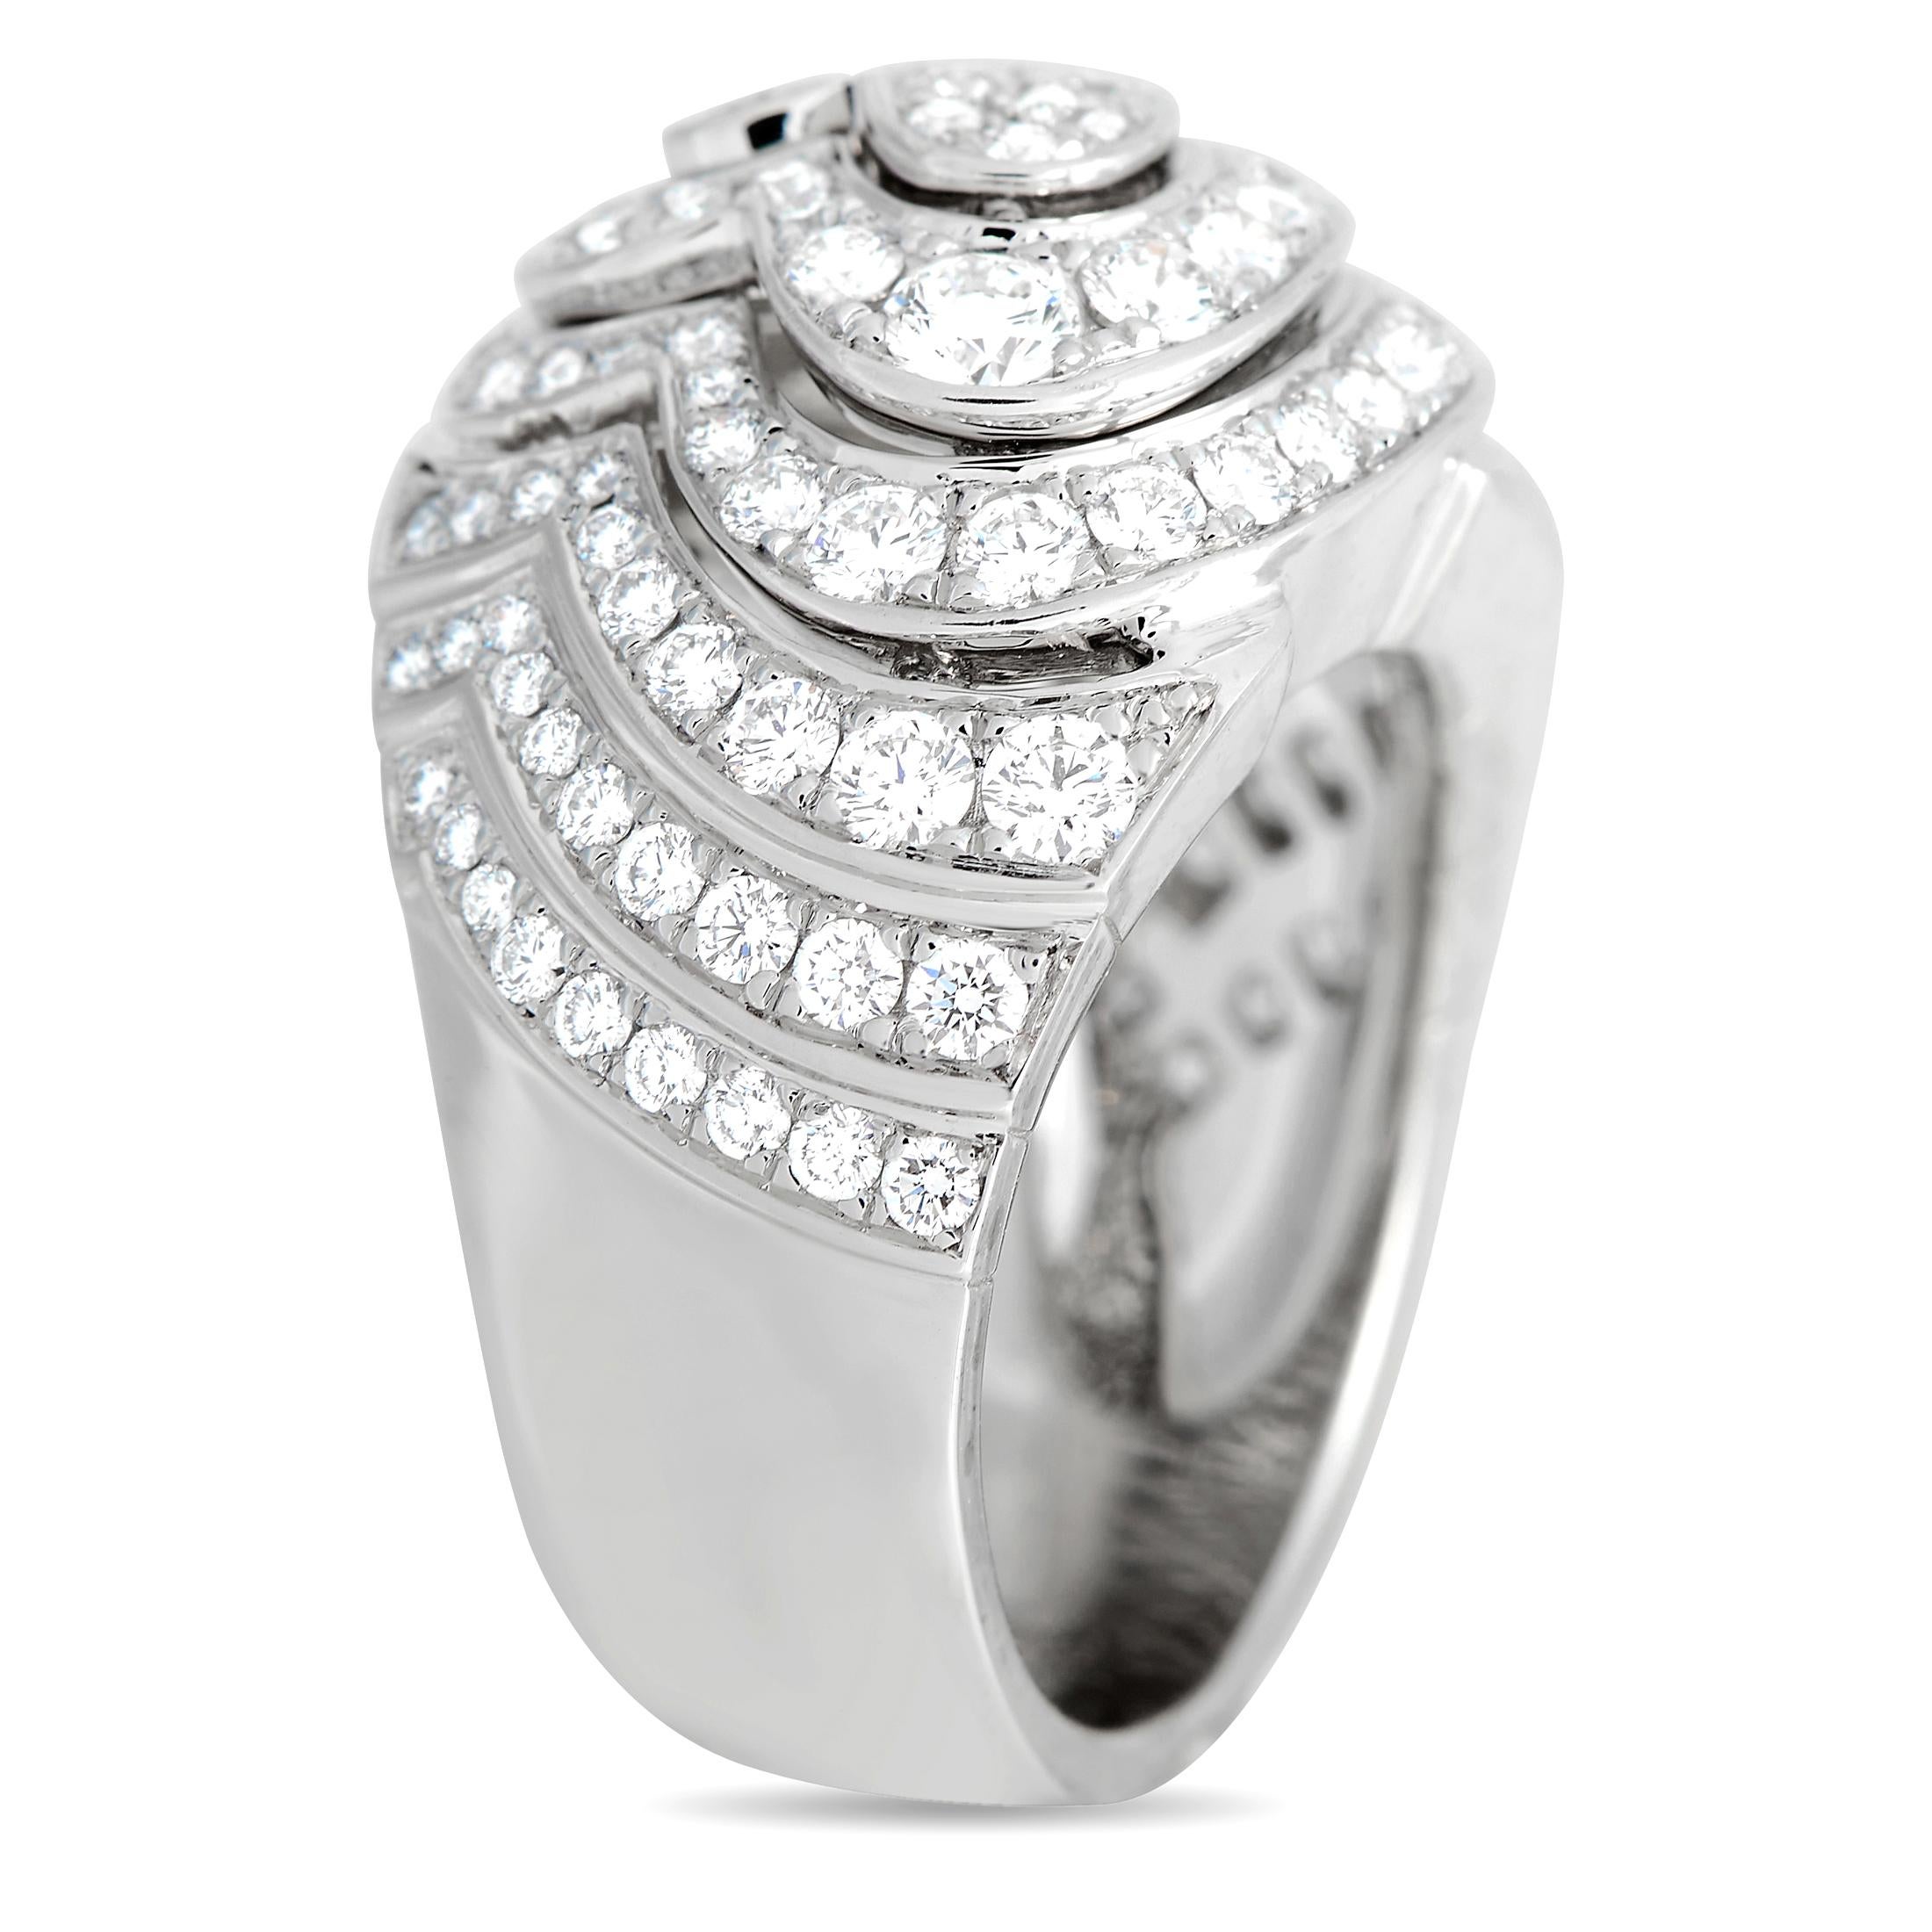 No doubt, this cocktail ring will be a precious addition to any lady's jewelry collection. This domed band from Cartier is meticulously crafted in 18K white gold. It is embellished with brilliant-cut diamonds set in a concentric heart pattern. This